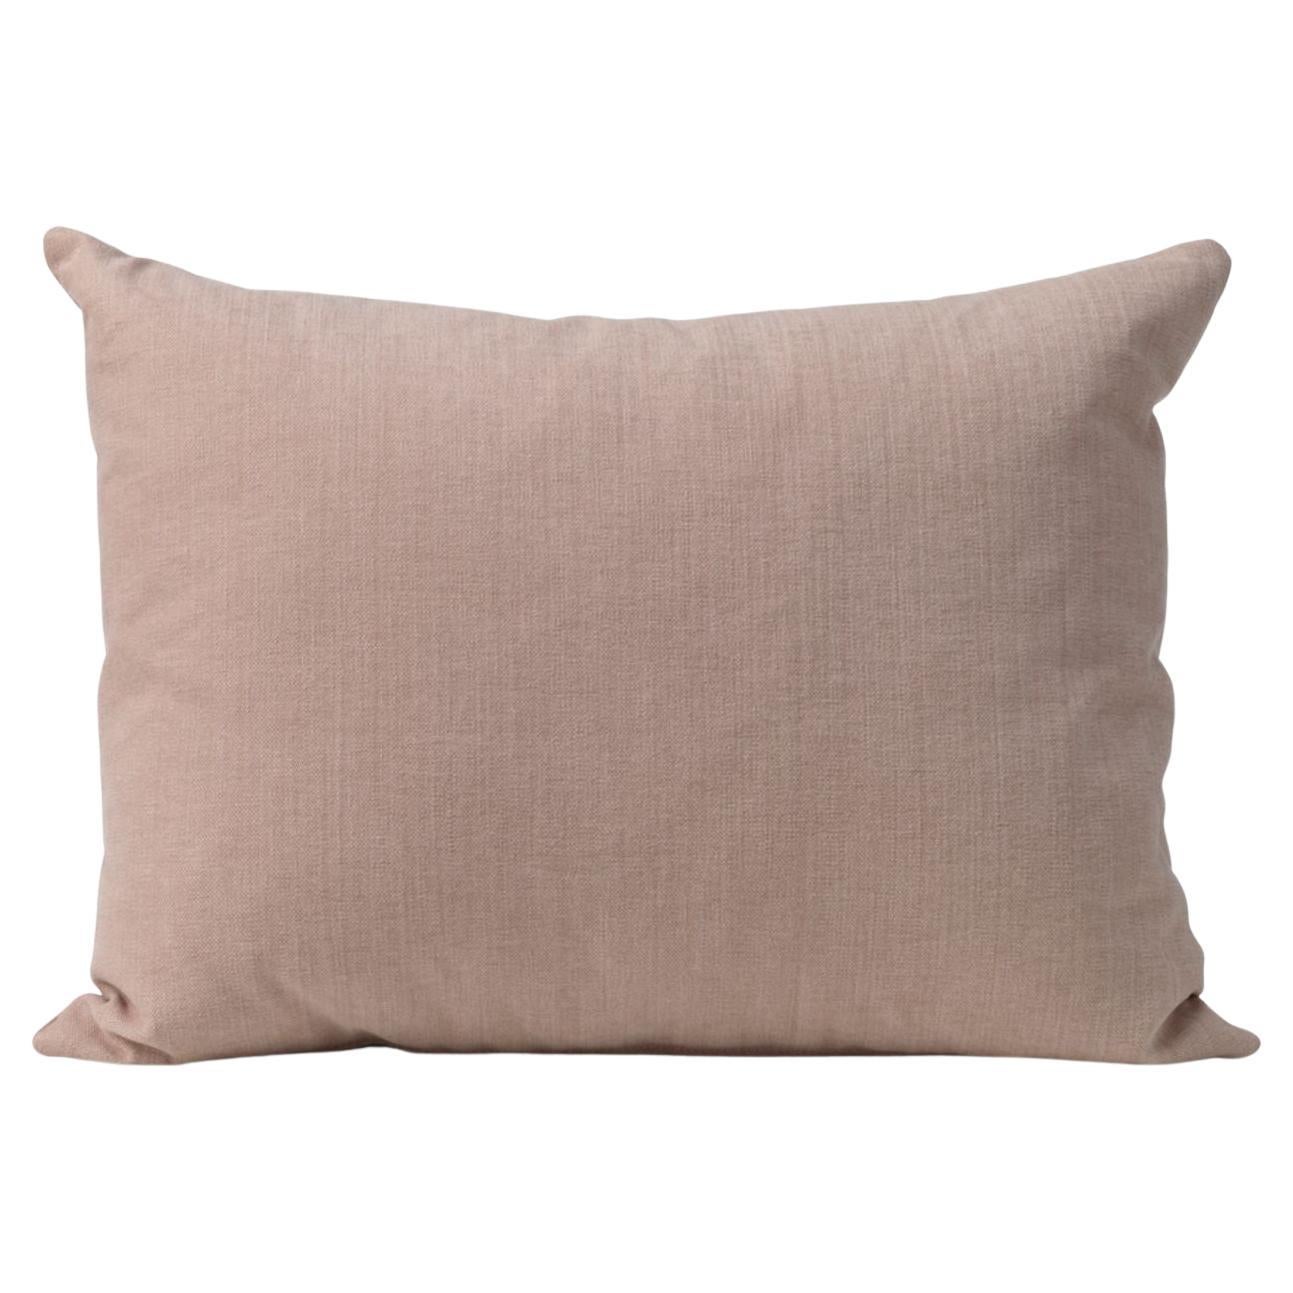 Galore Cushion Square Light Rose by Warm Nordic